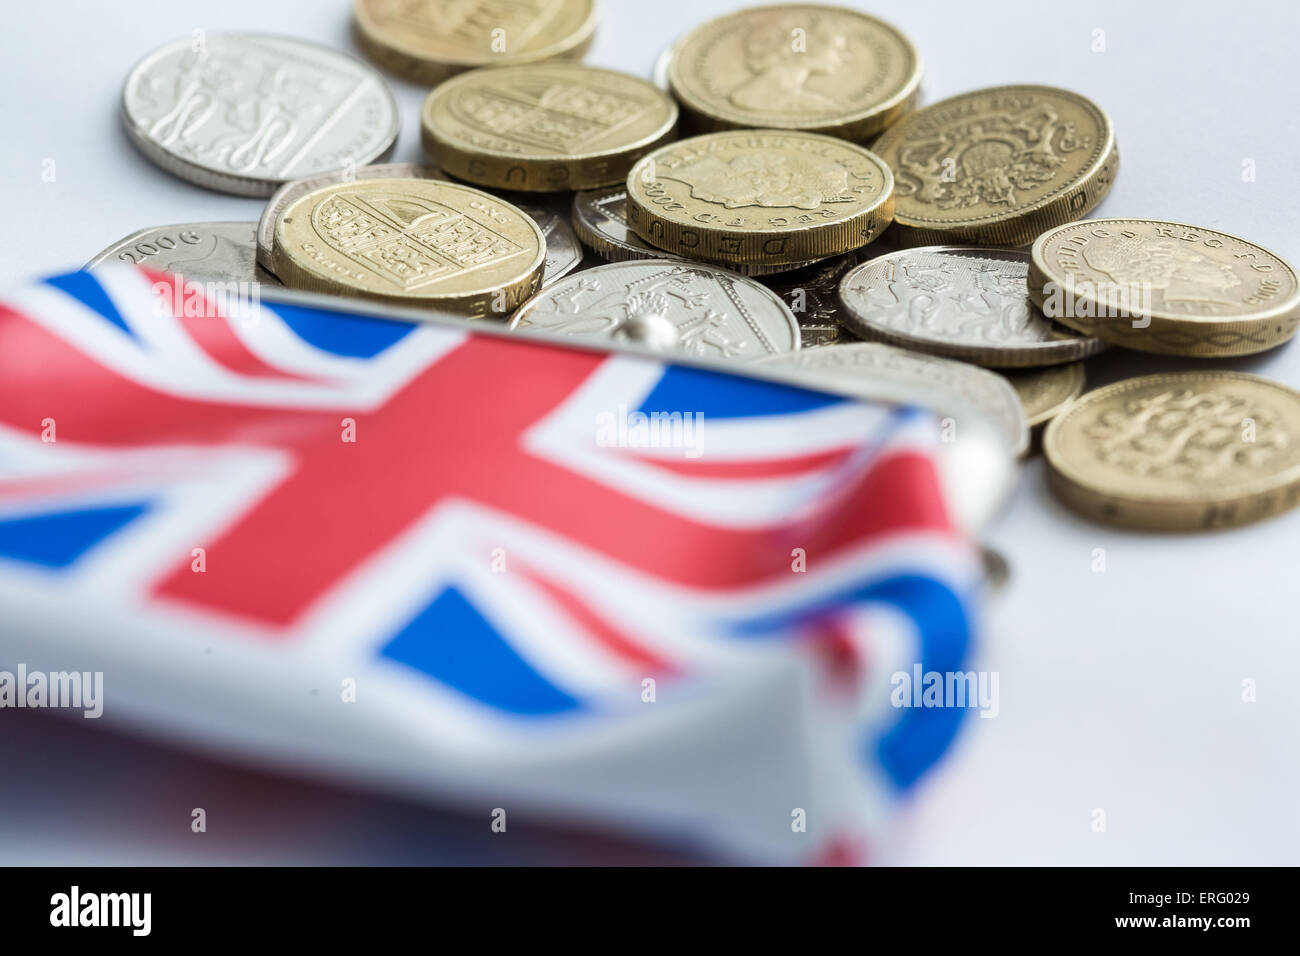 Union Flag money purse with British cash sterling currency Stock Photo